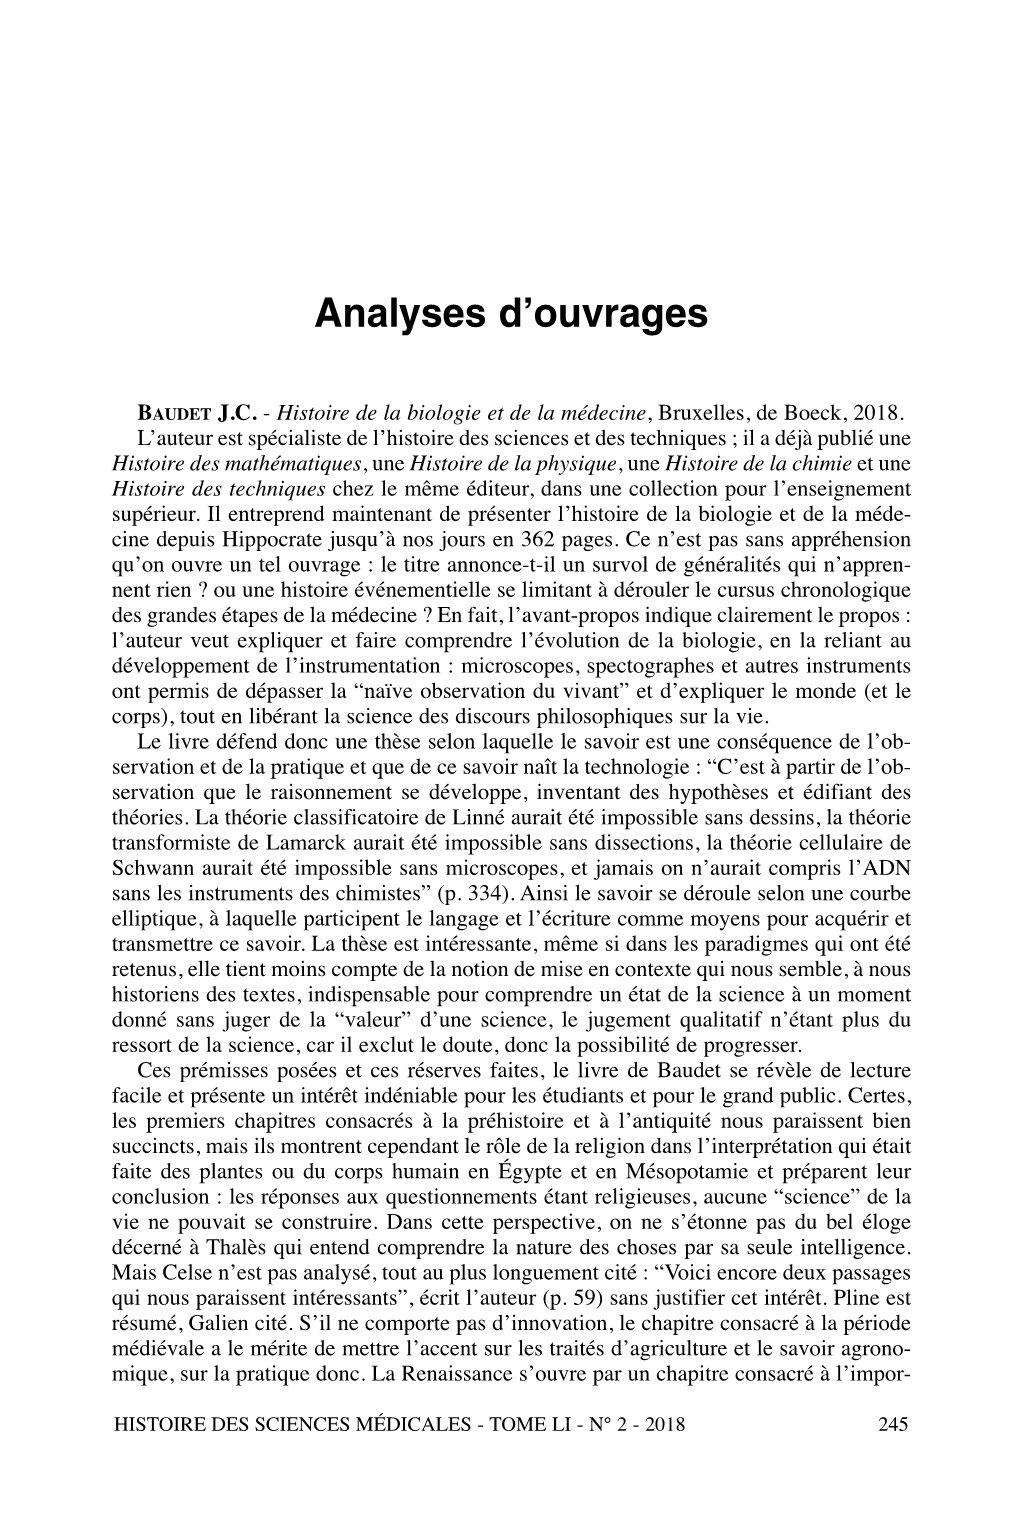 Analyses D'ouvrages